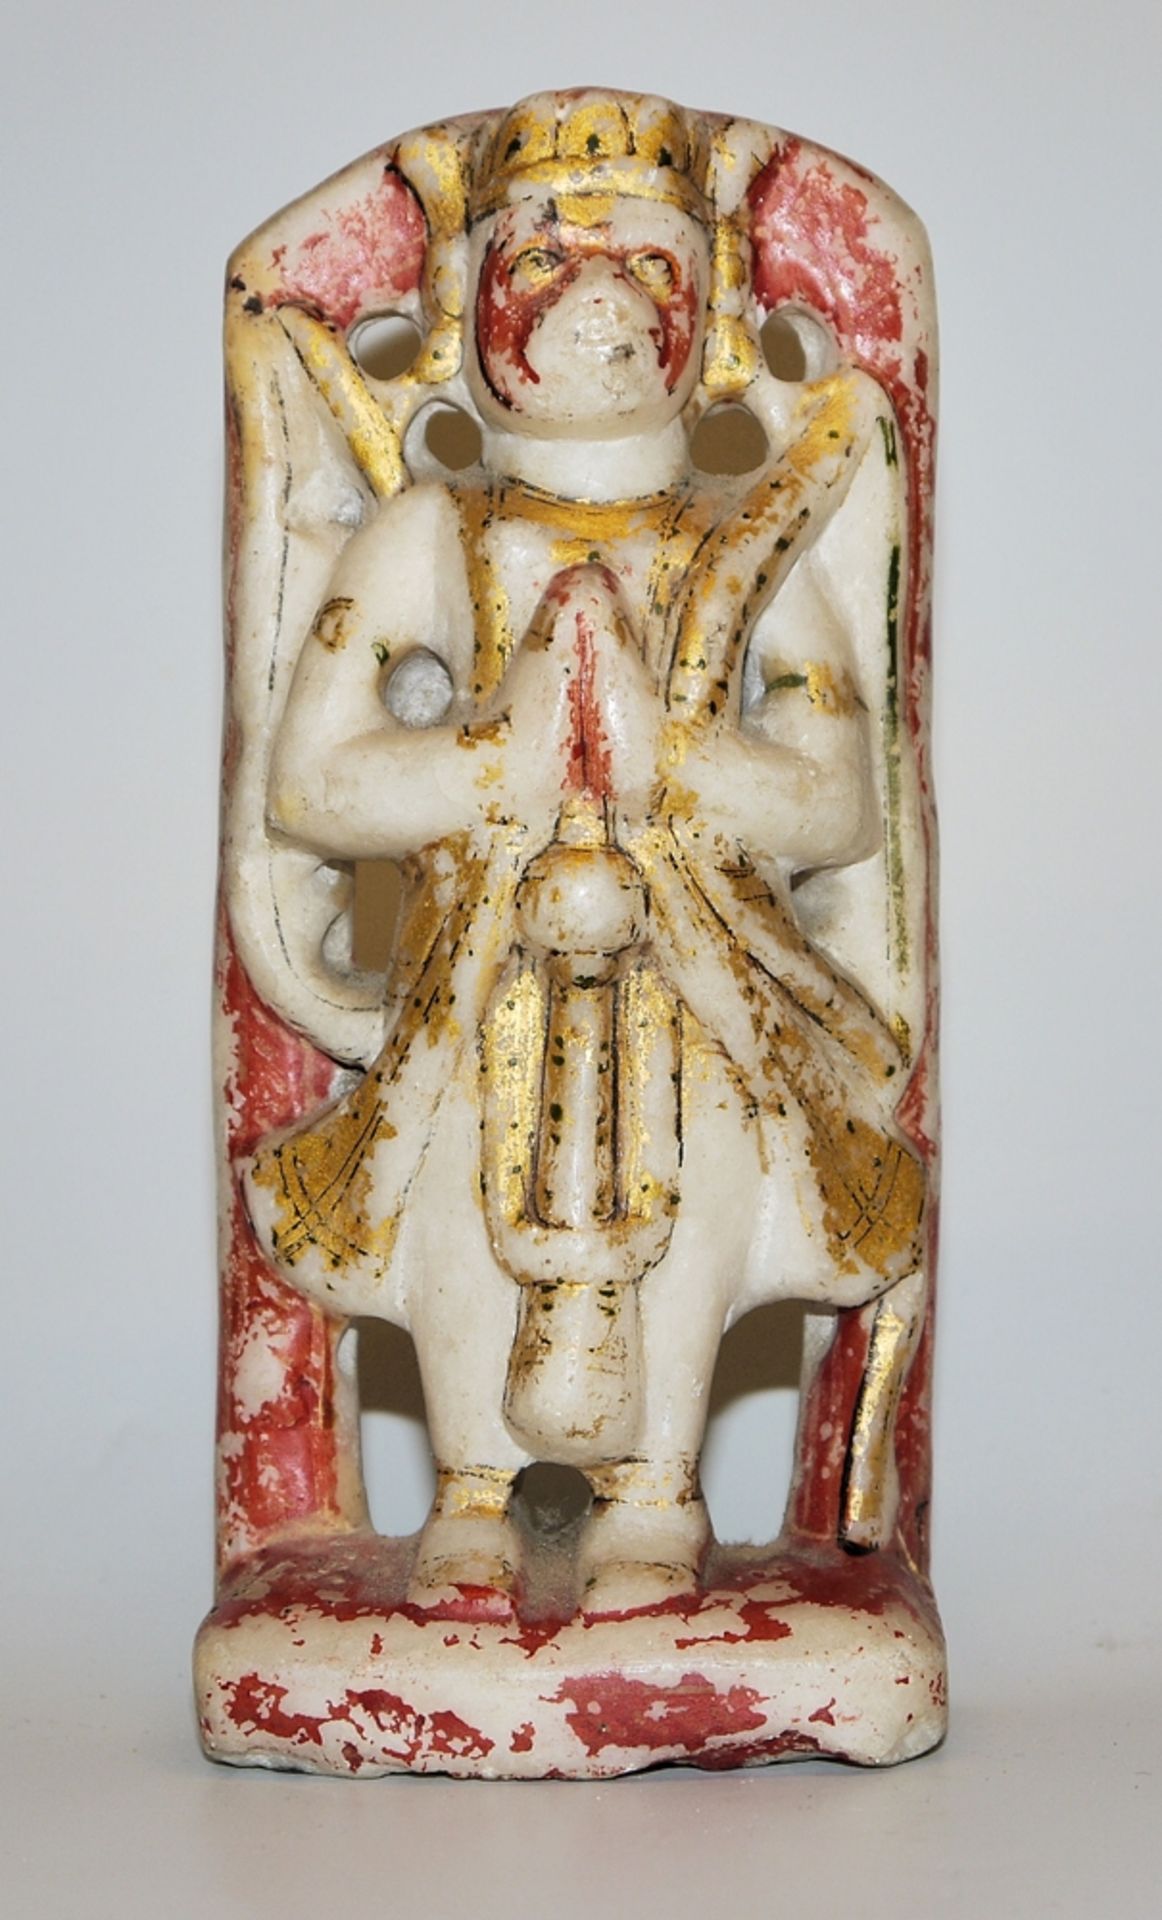 The Monkey God Hanuman, marble sculpture from Rajasthan, India 18th century